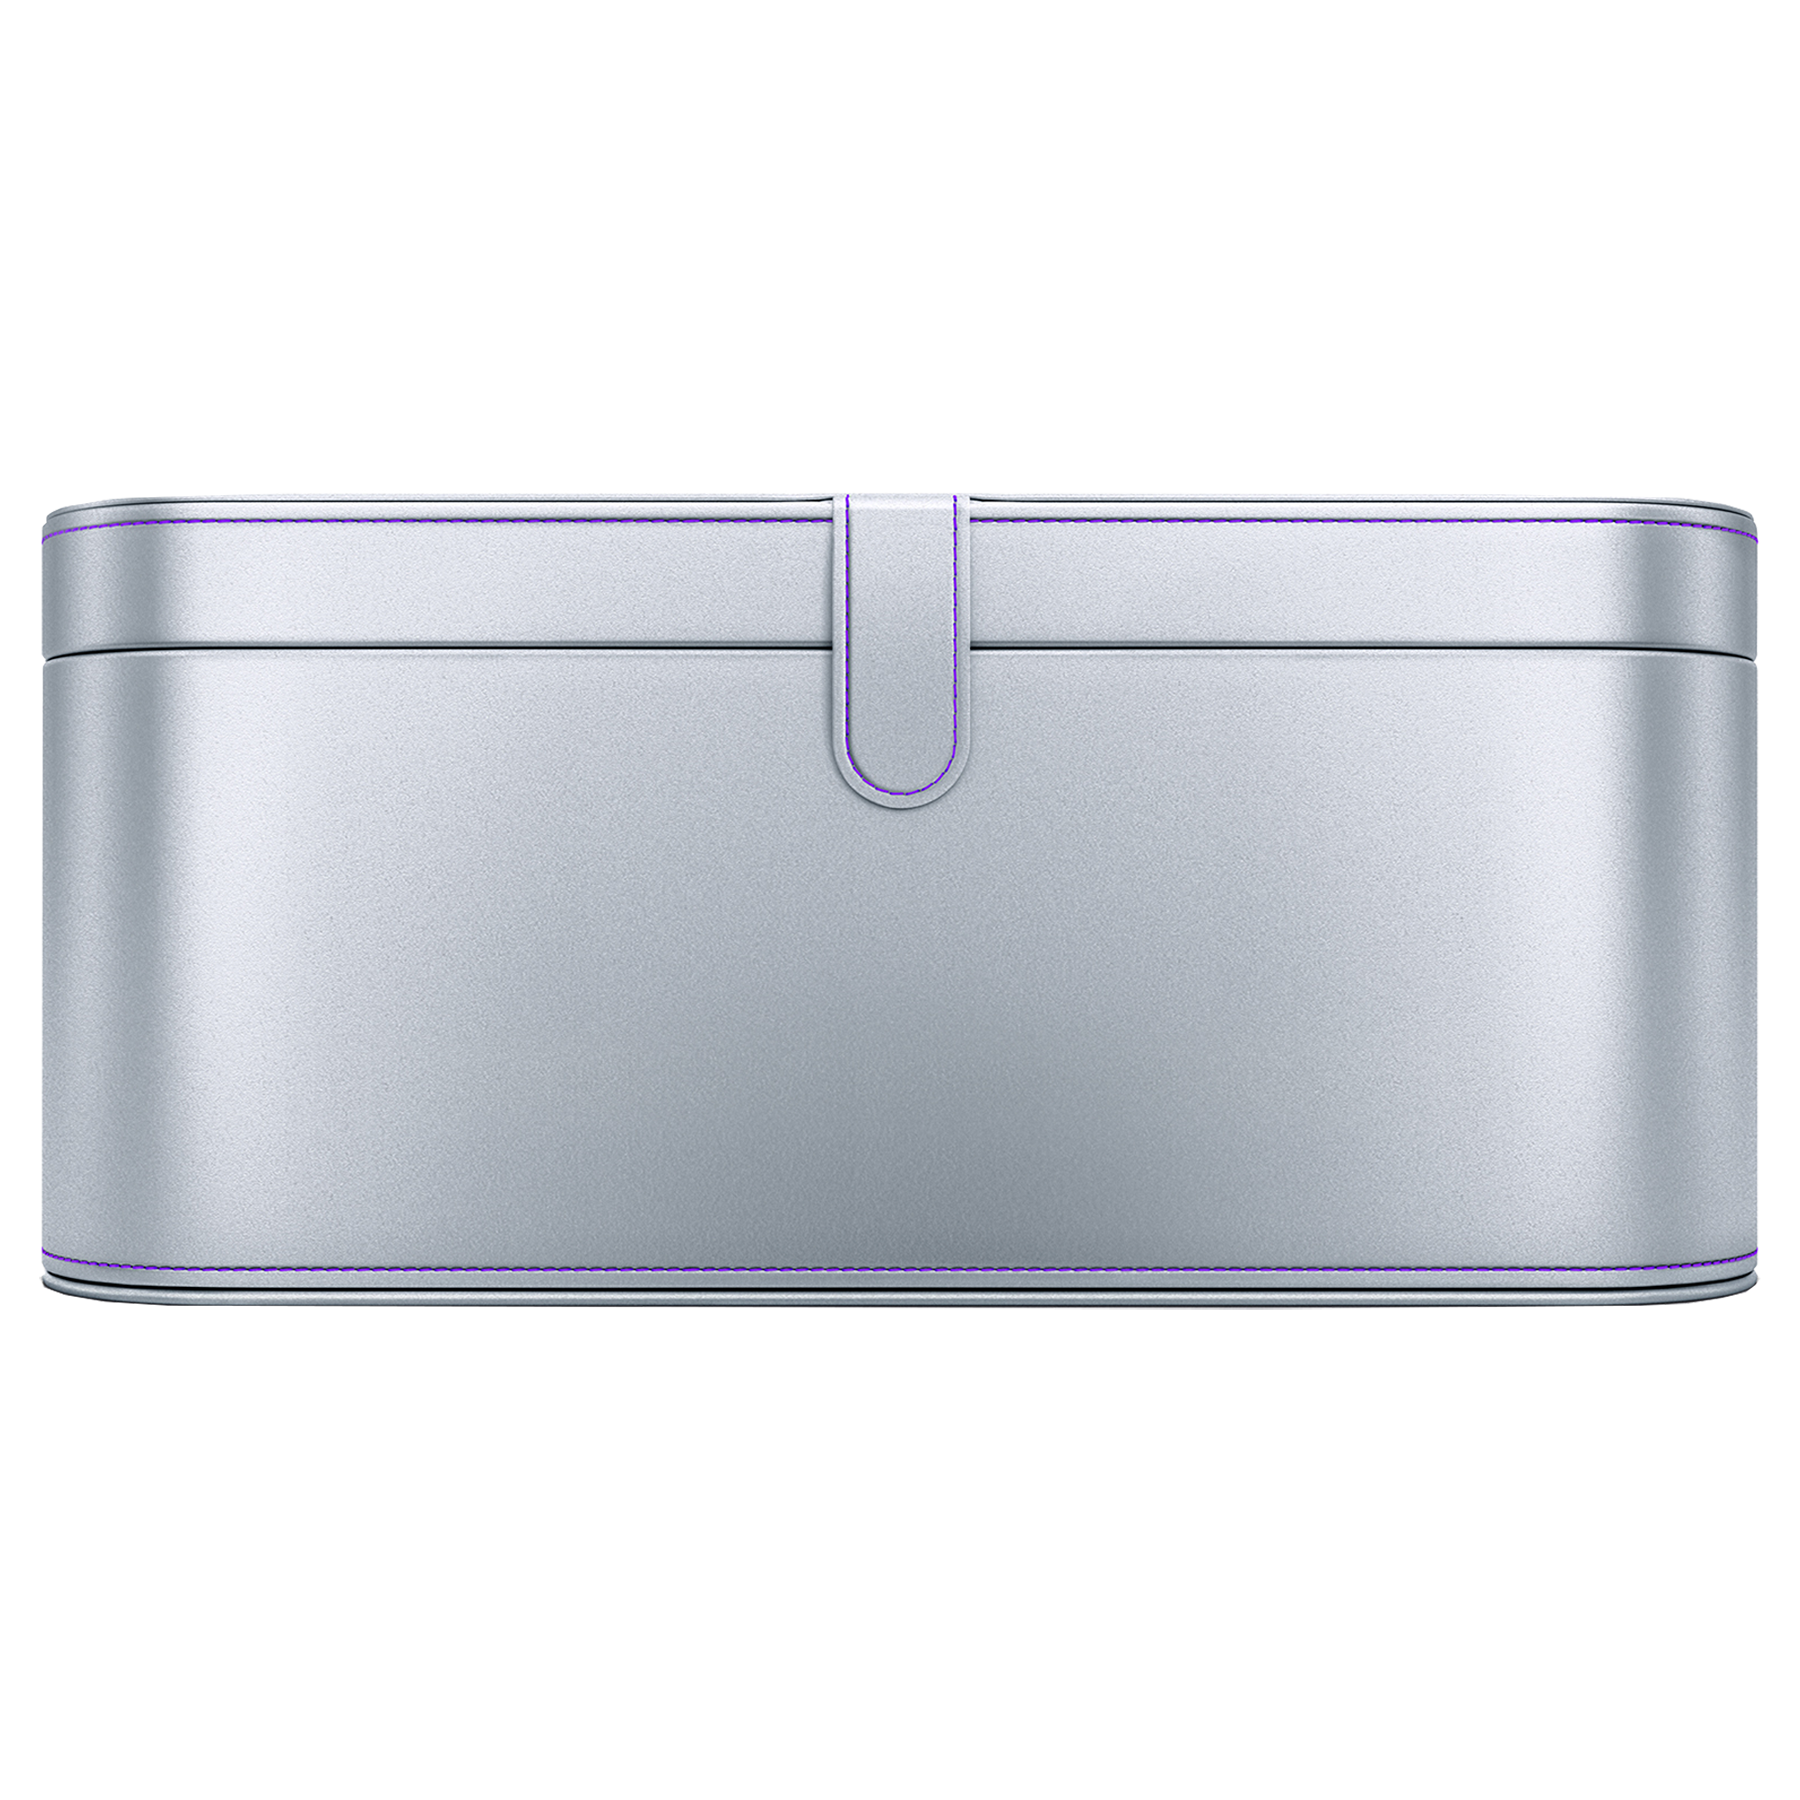 Dyson Supersonic Presentation Case For Hair Dryer (968683-04, Silver)_1